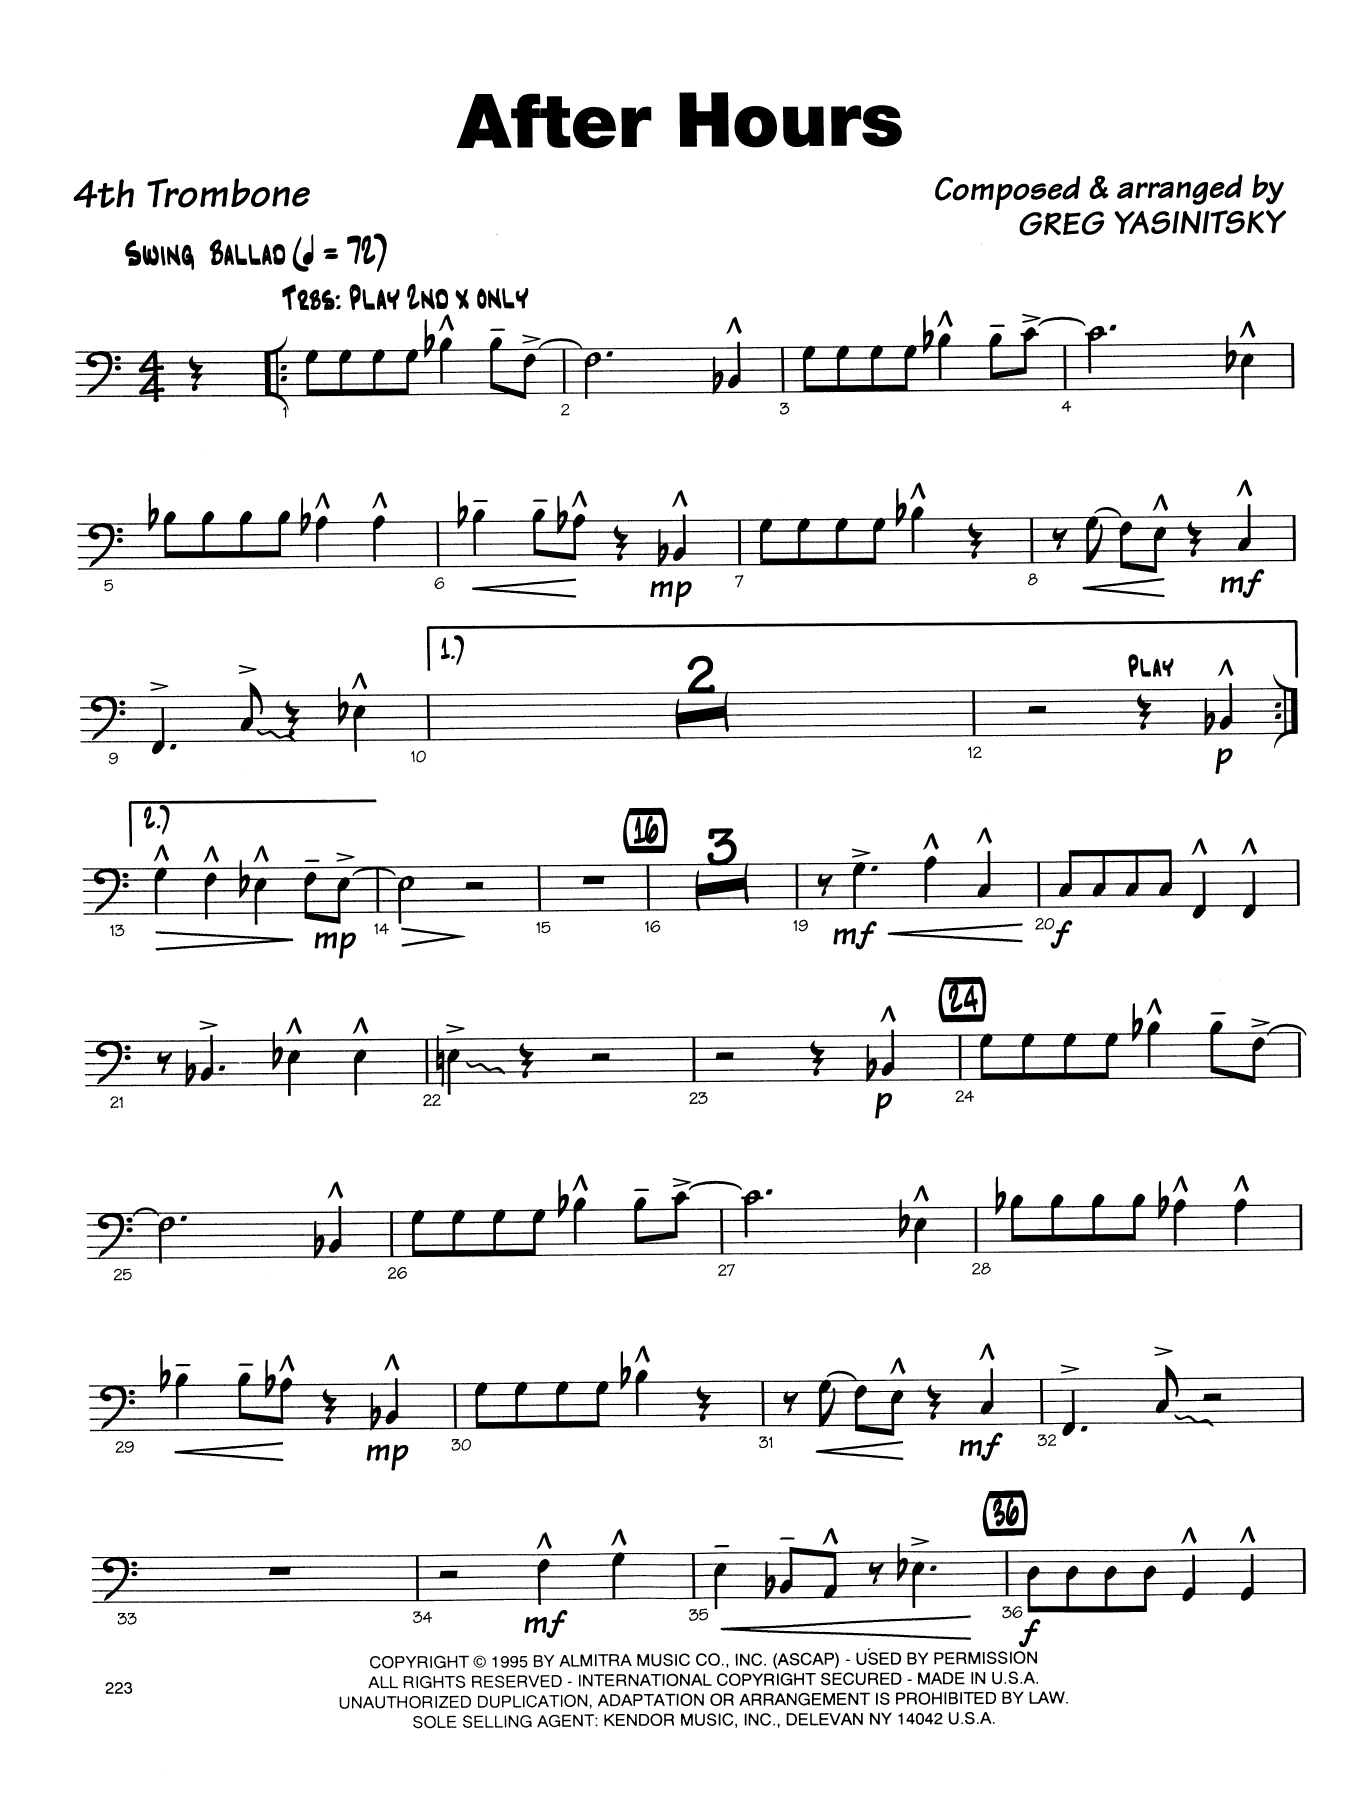 Download Gregory Yasinitsky After Hours - 4th Trombone Sheet Music